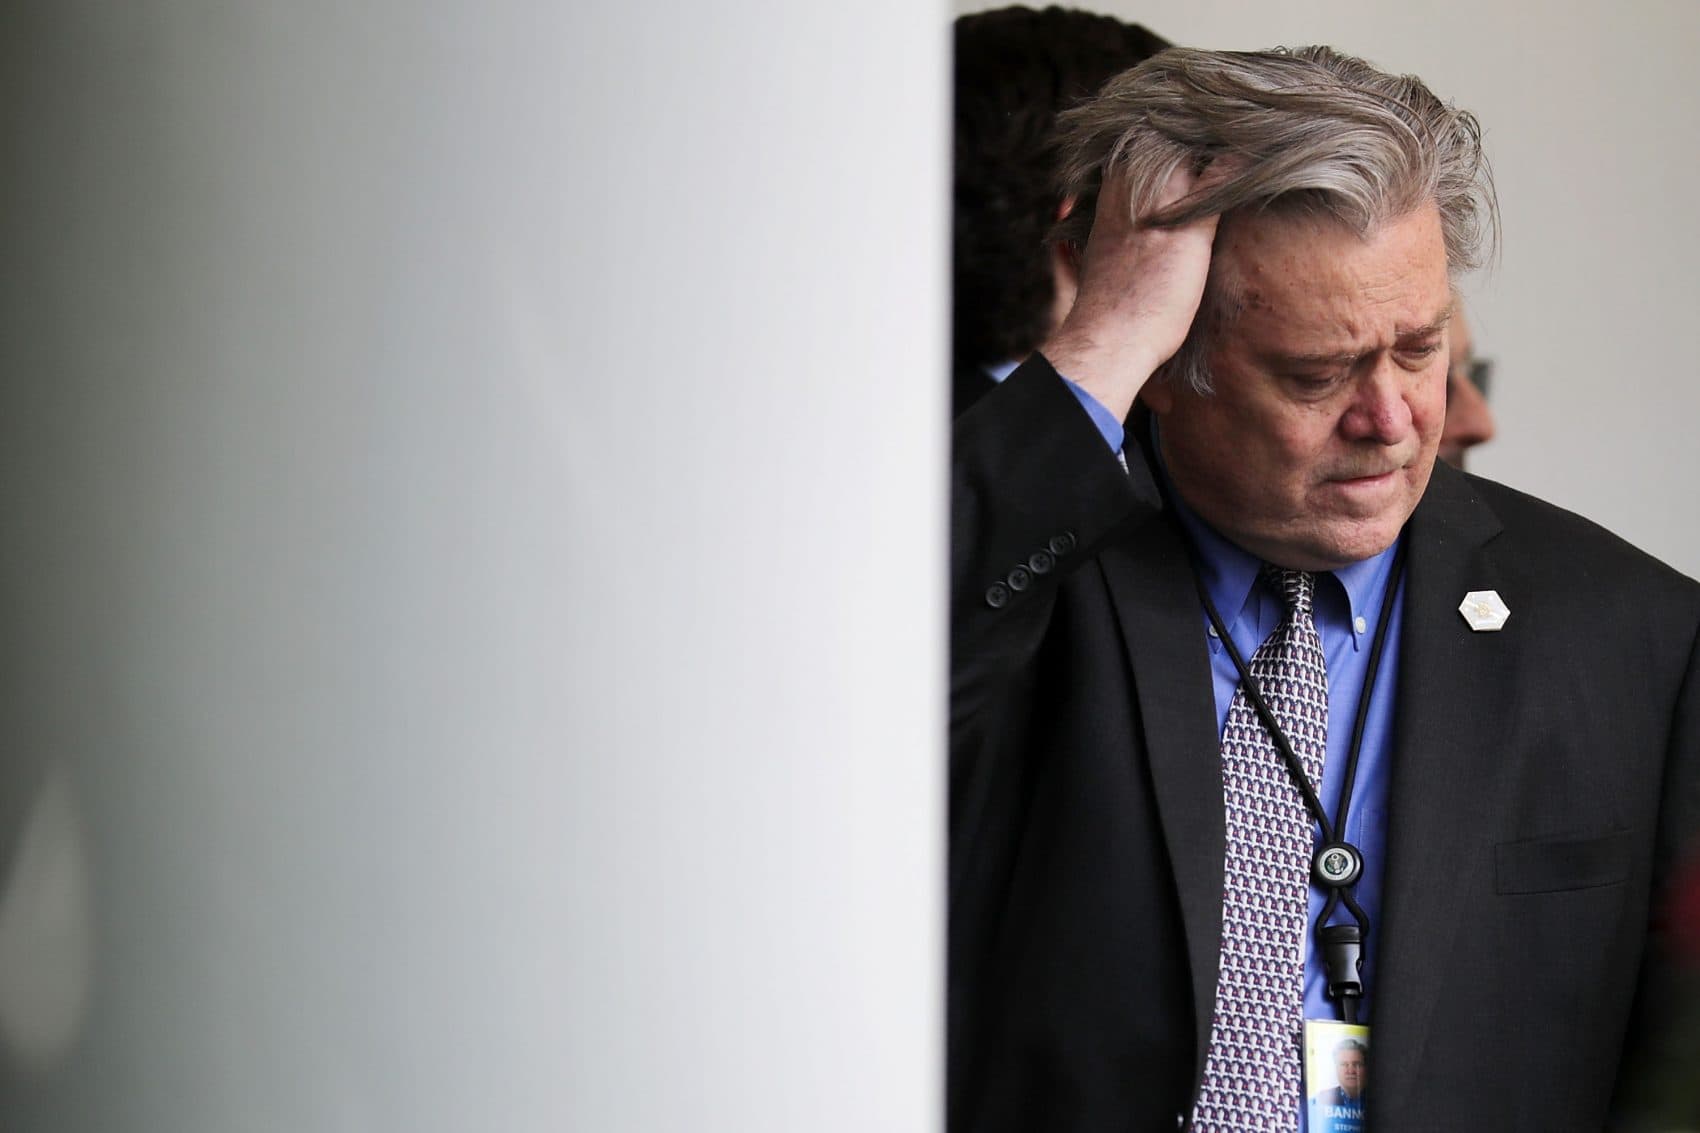 President Trump, Steve Bannon And The Legacy Of 1968